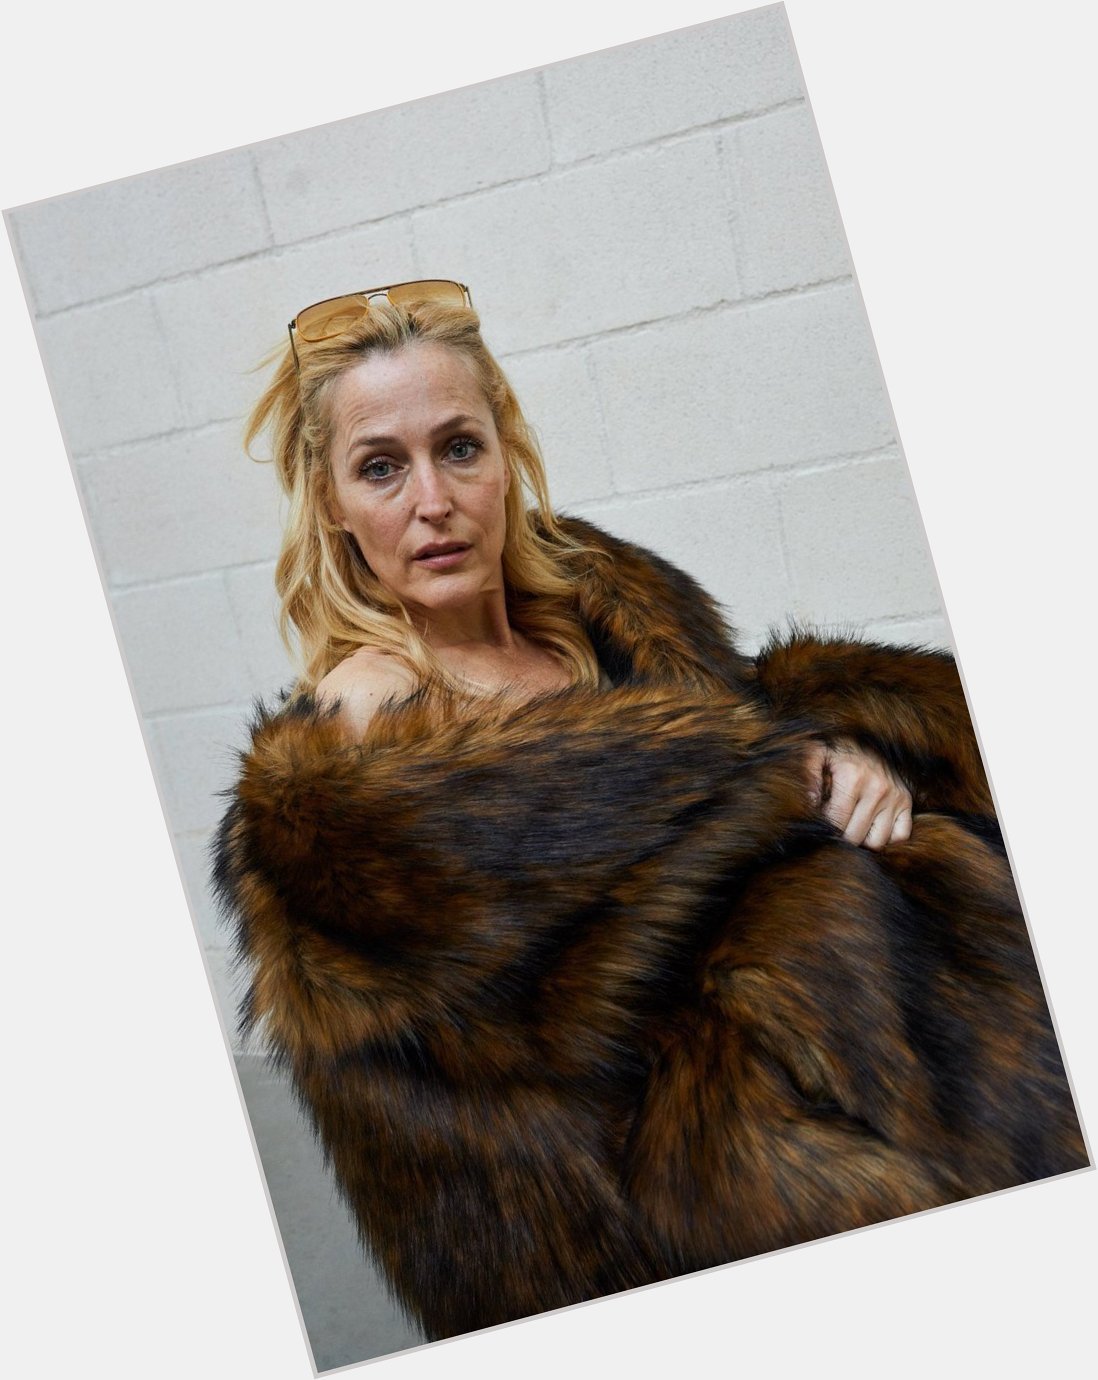 The milfiest milf happy birthday miss gillian anderson i love you so much i\d die for you <3 